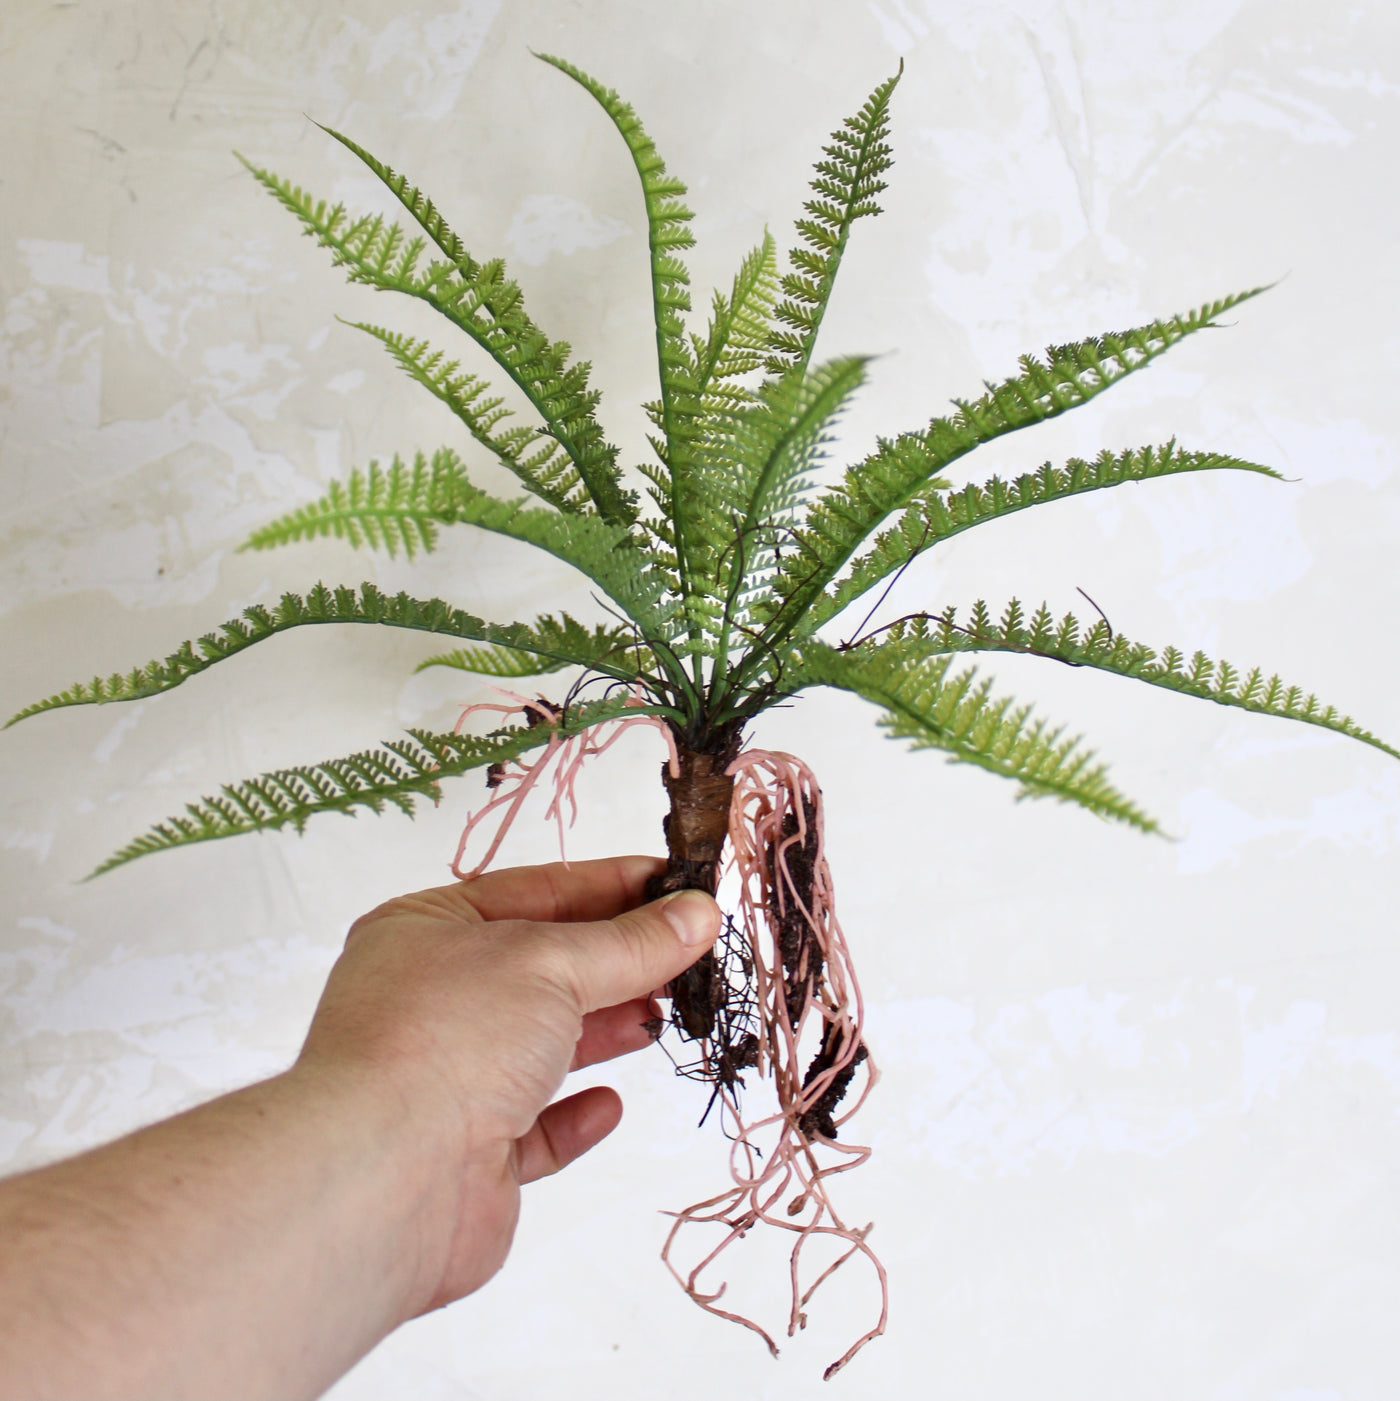 Wood Fern with Exposed Roots